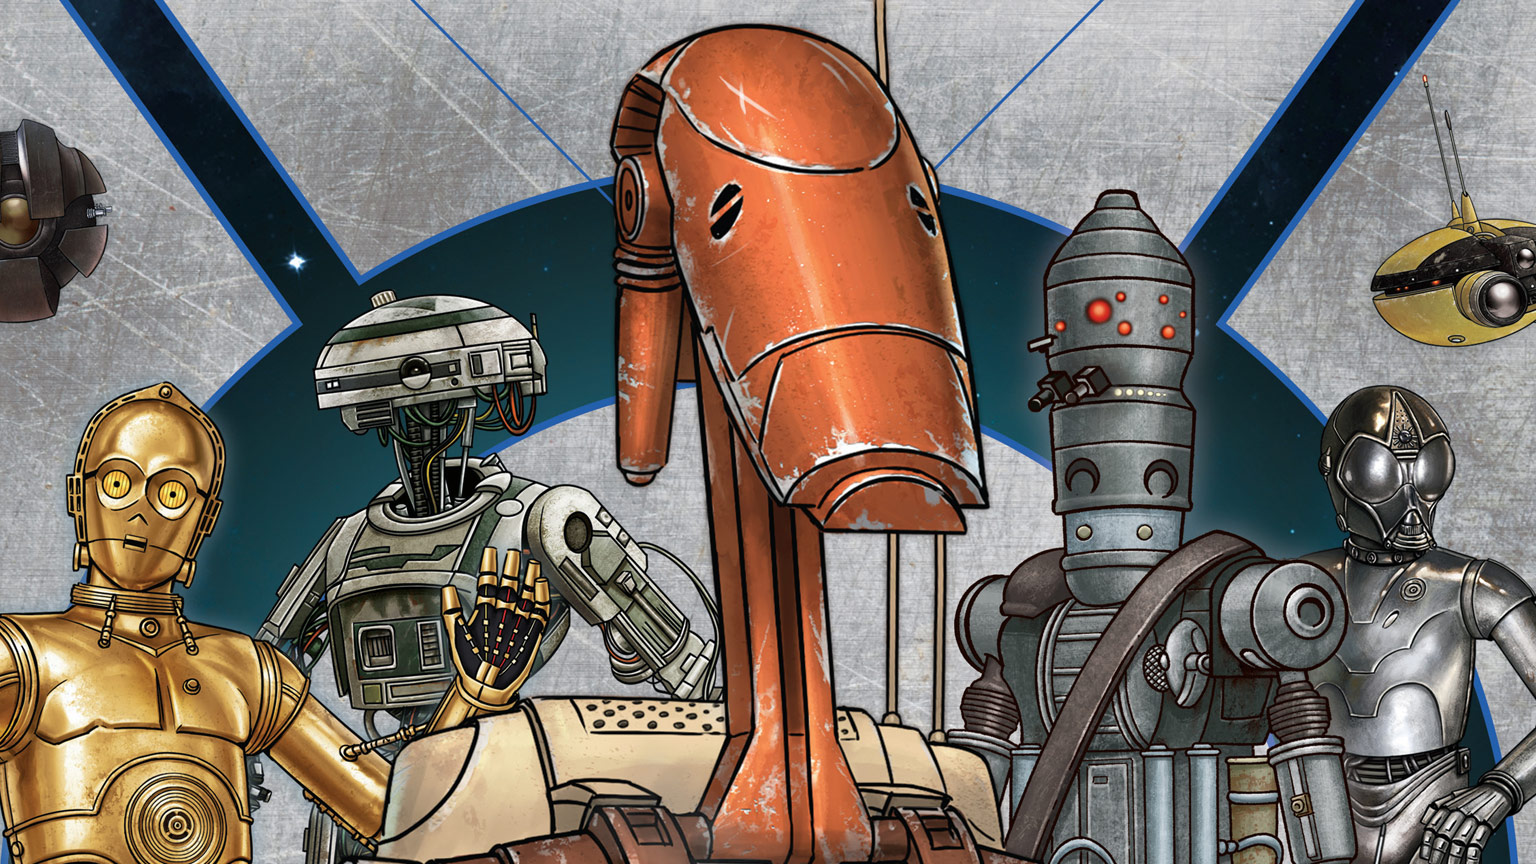 STAR WARS: DROIDOGRAPHY, the Definitive Droid Book Coming Just In Time For Christmas!